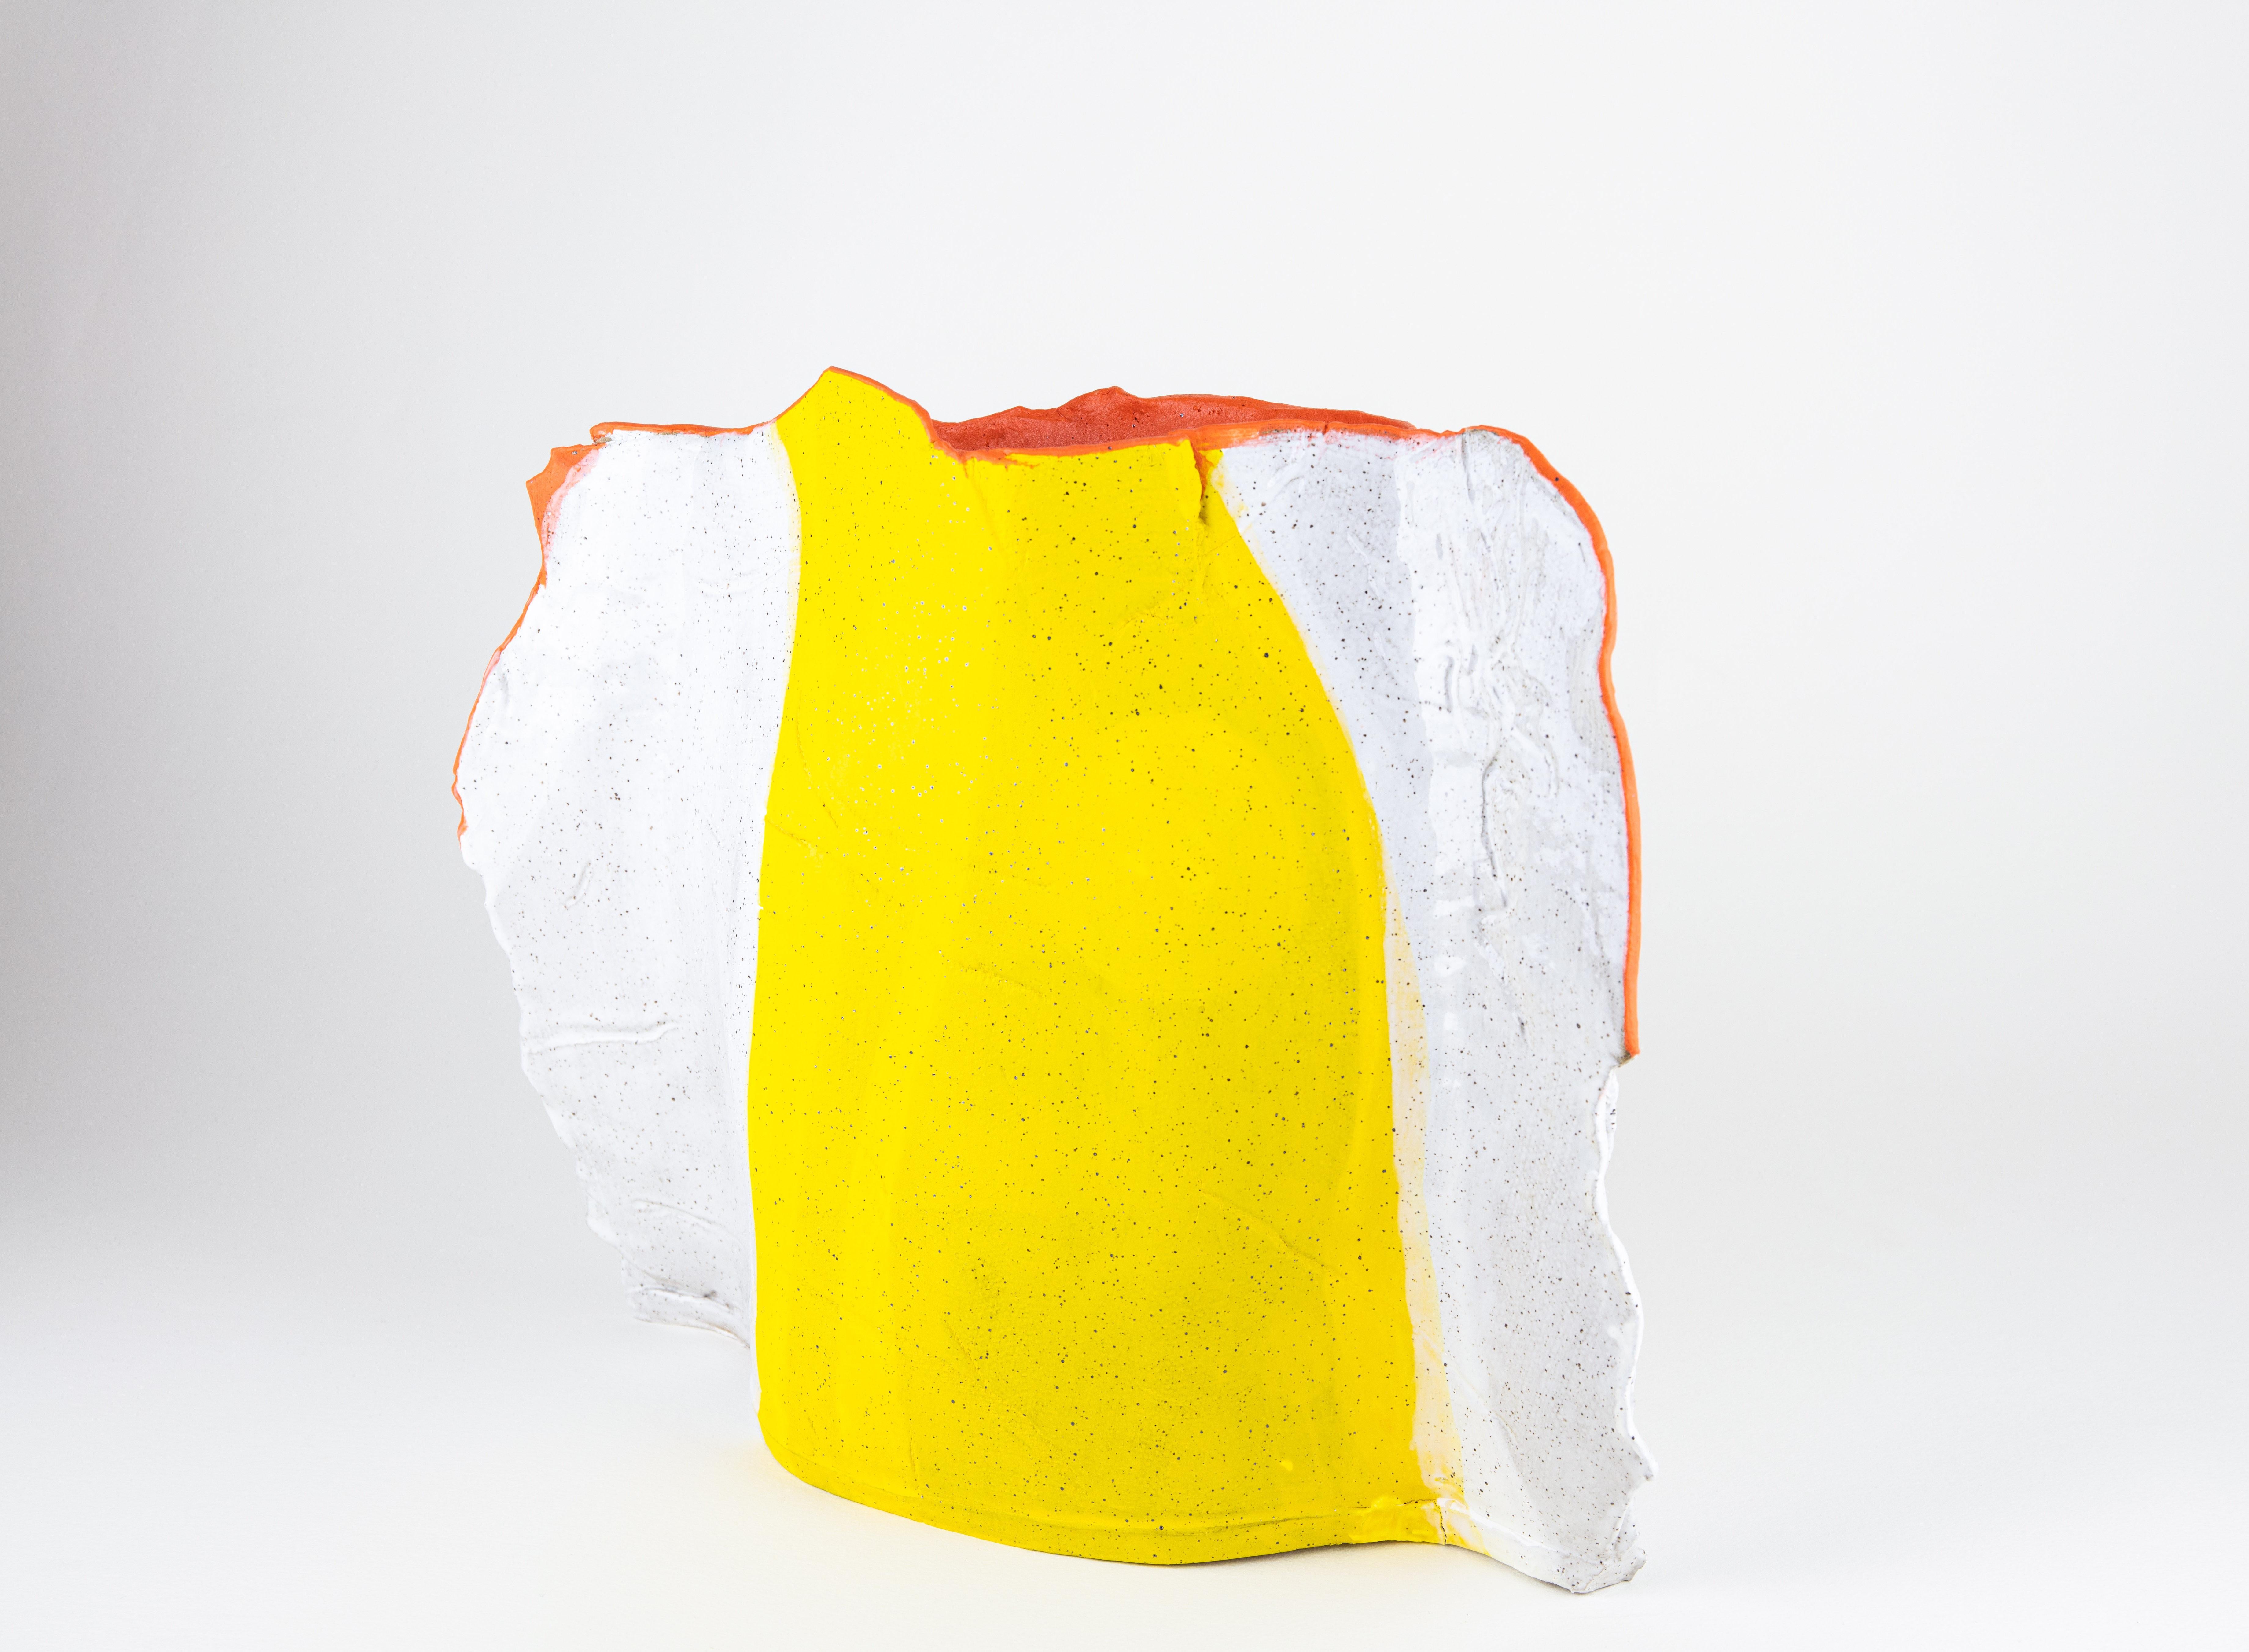 Bark Vessel, Abstract ceramic sculpture, yellow and white - Sculpture by Rachelle Krieger